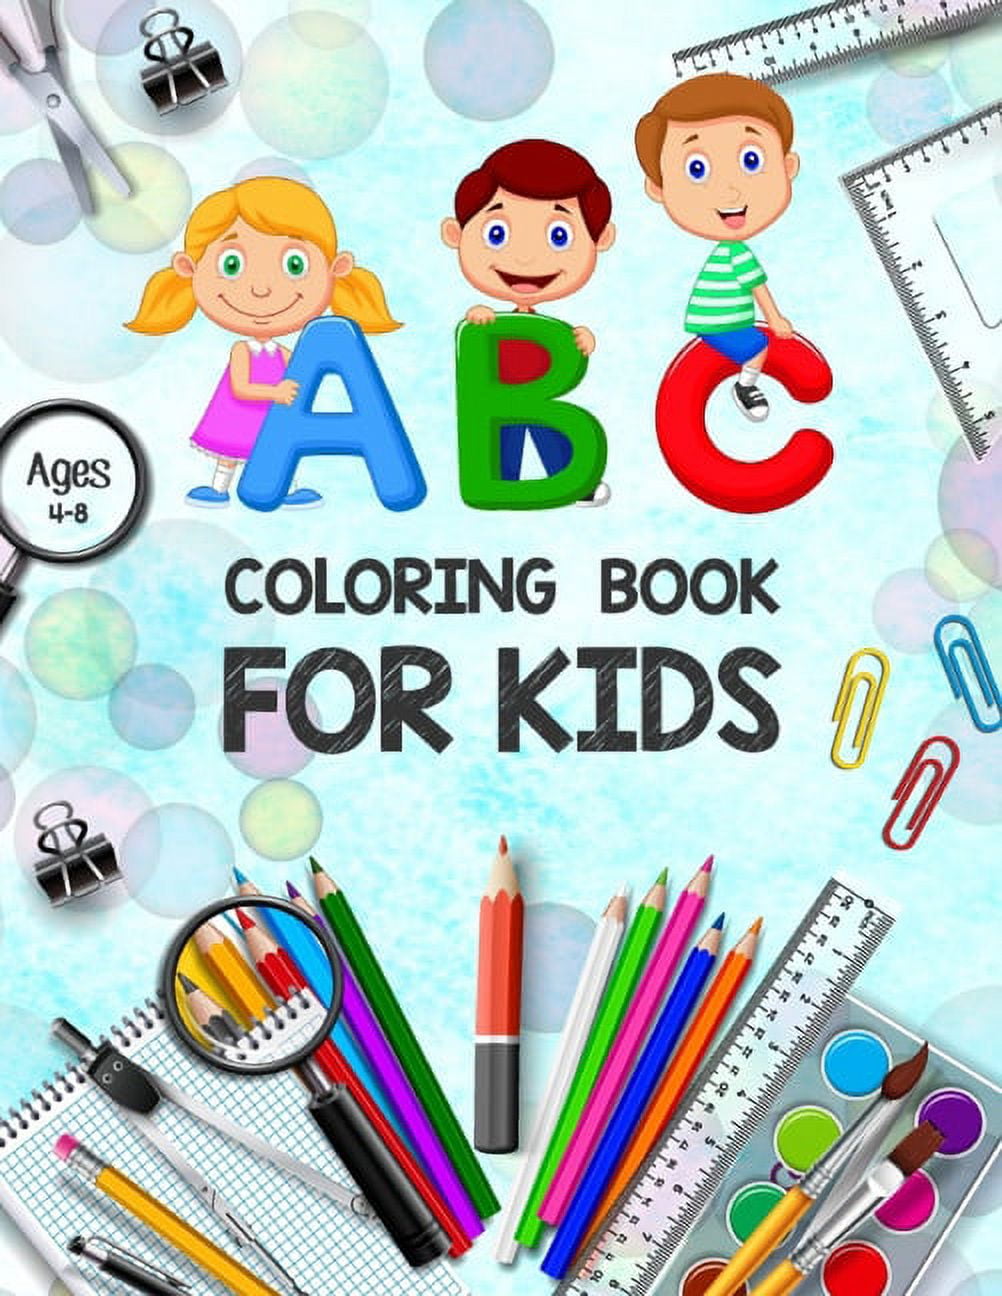 Neliblu Mini Coloring Books For Kids And Toddlers - Pack Of 24